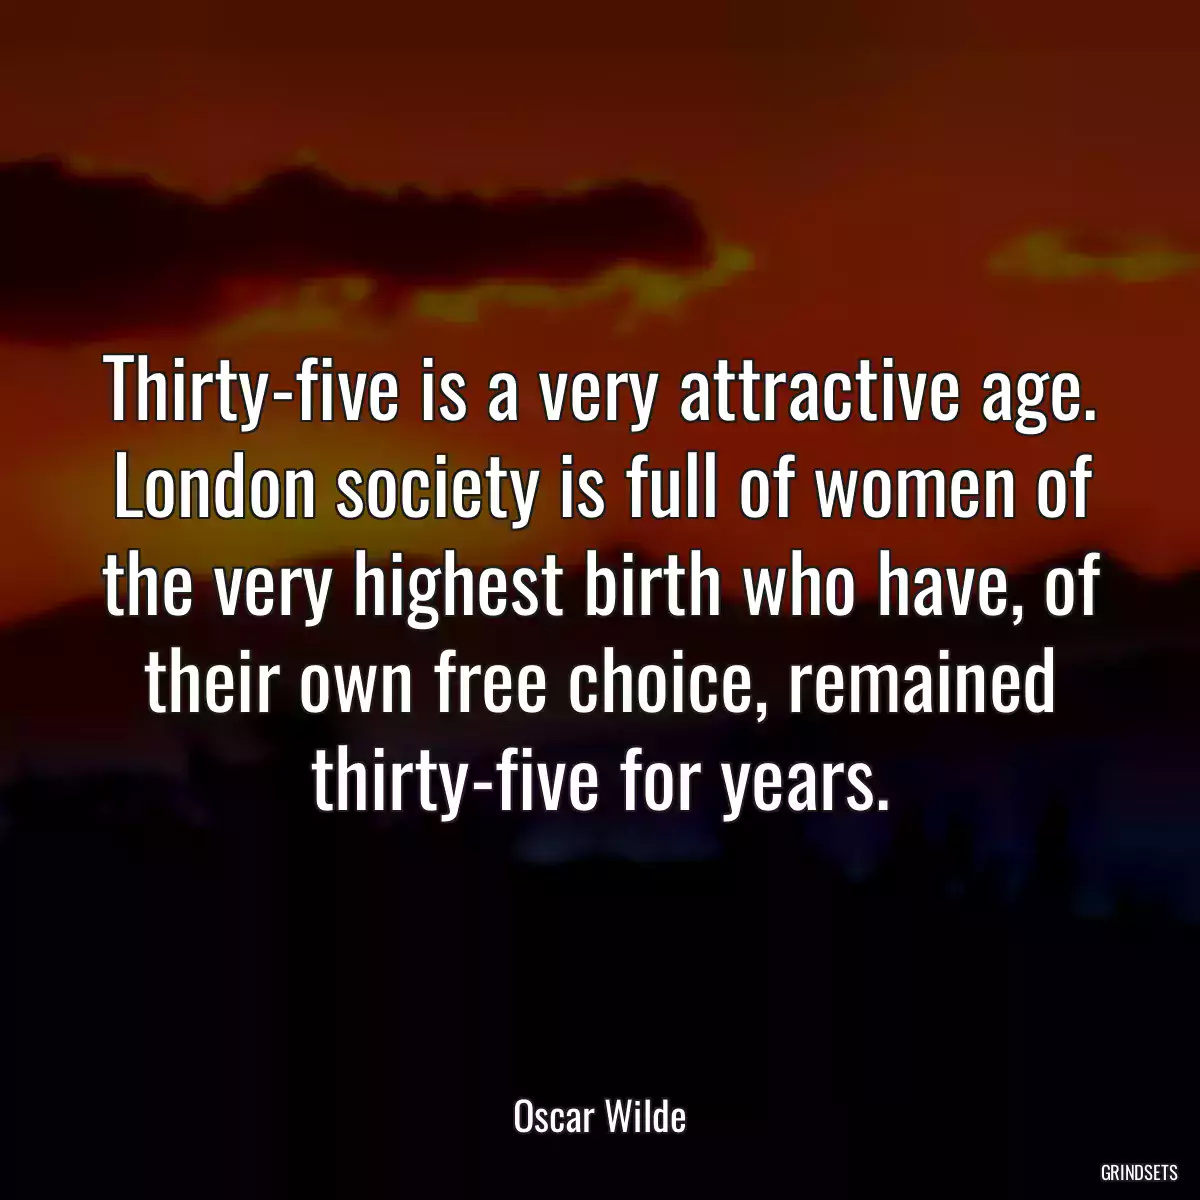 Thirty-five is a very attractive age. London society is full of women of the very highest birth who have, of their own free choice, remained thirty-five for years.